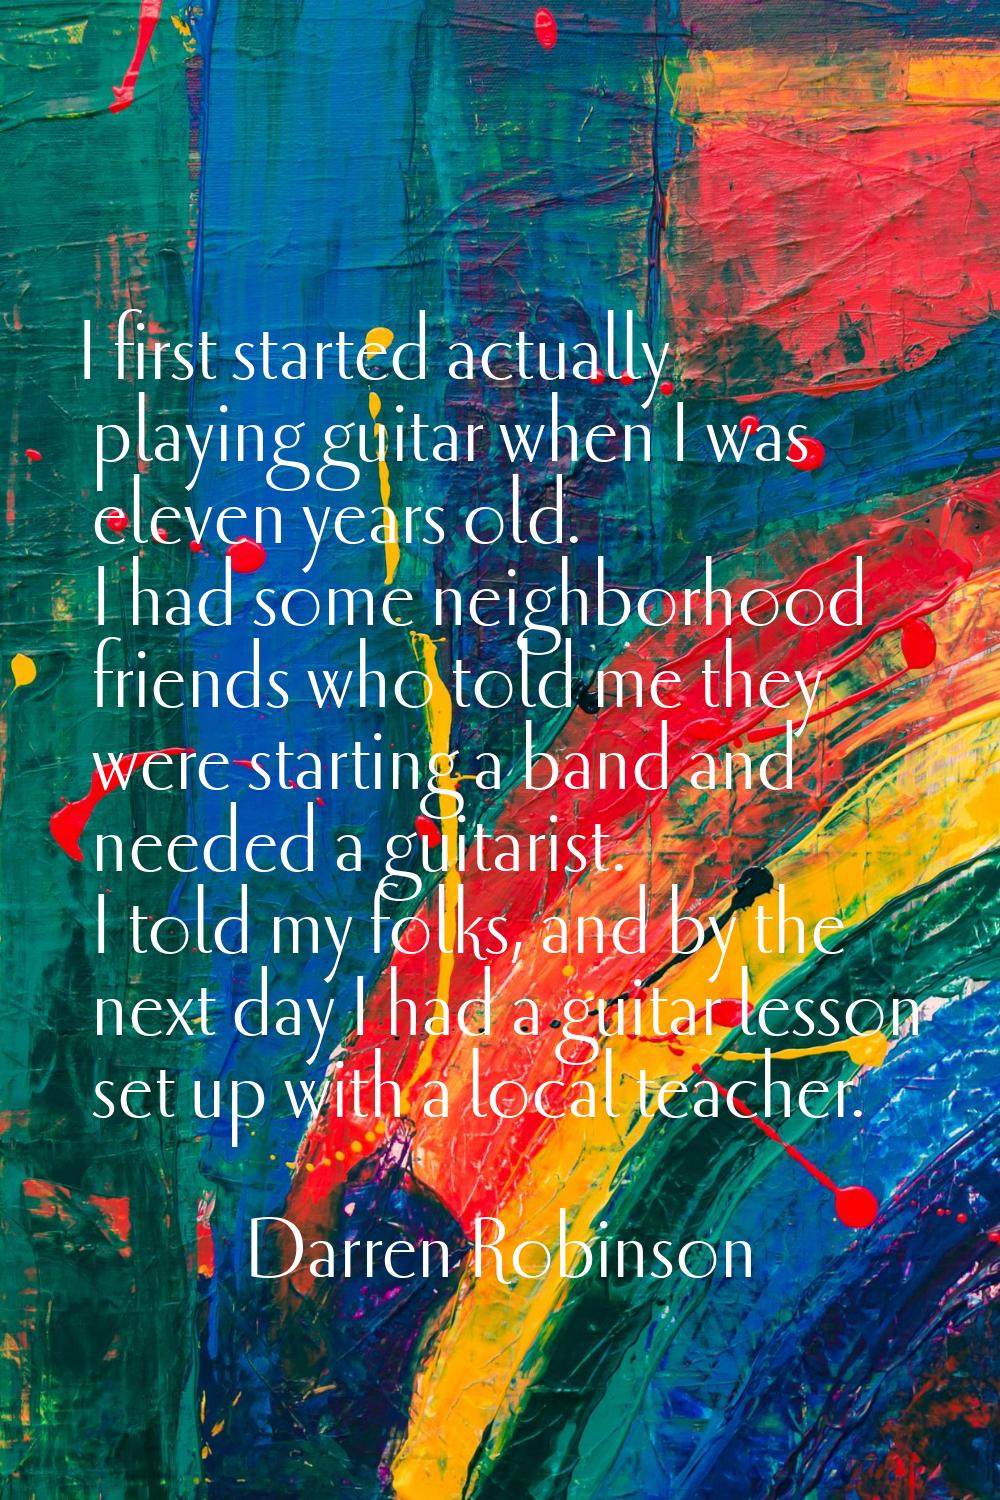 I first started actually playing guitar when I was eleven years old. I had some neighborhood friend